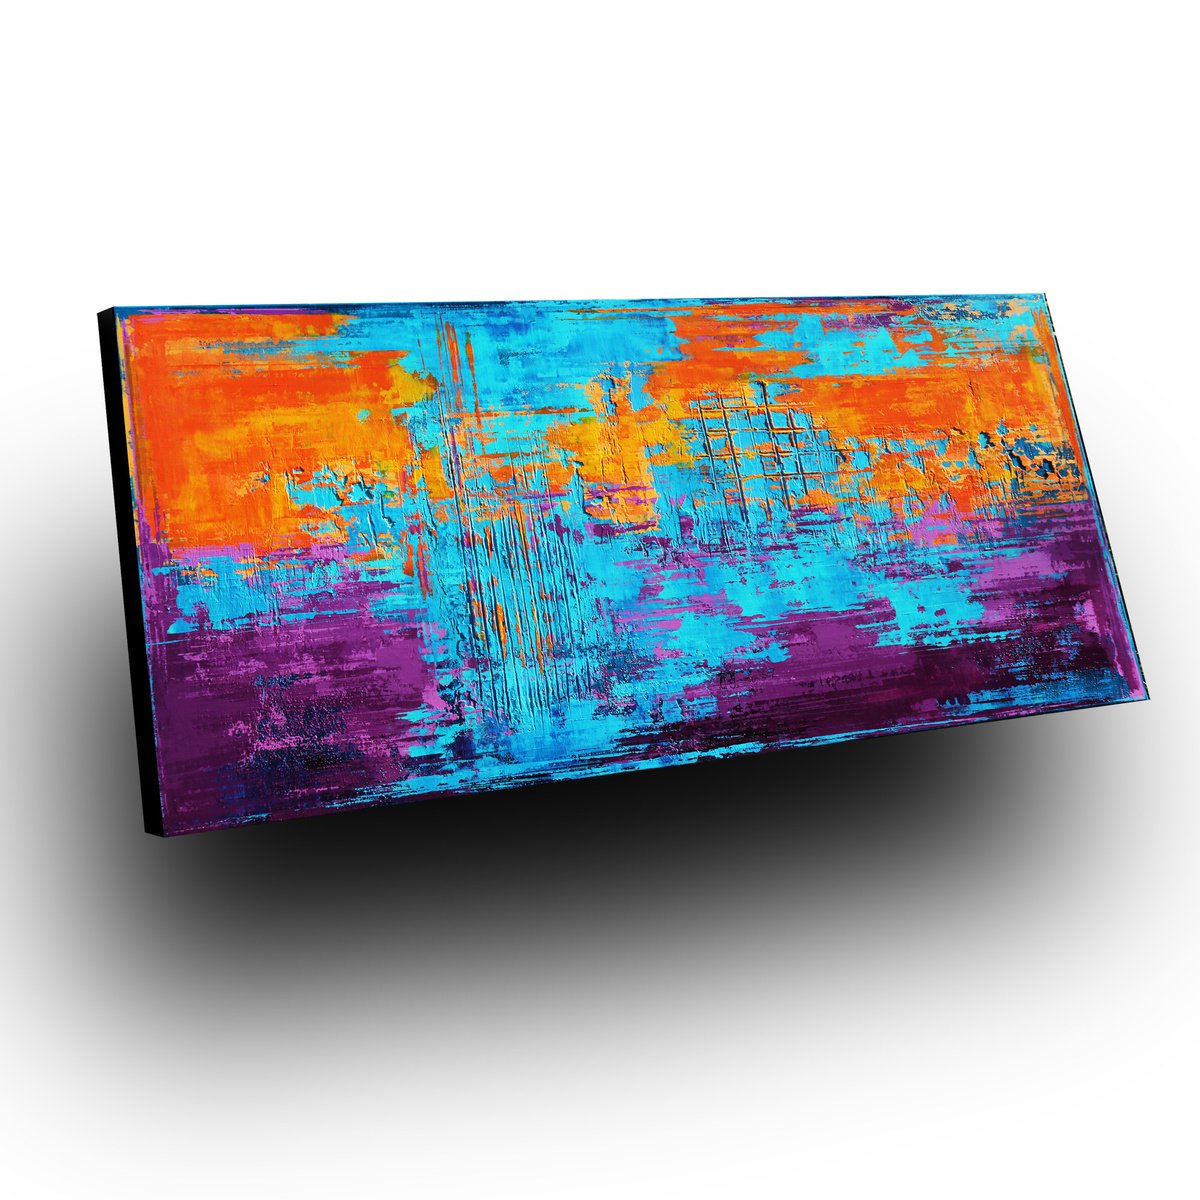 GLOWING SKY - 160 x 80 CM - TEXTURED ACRYLIC PAINTING ON CANVAS * VIBRANT COLORS by Inez Froehlich